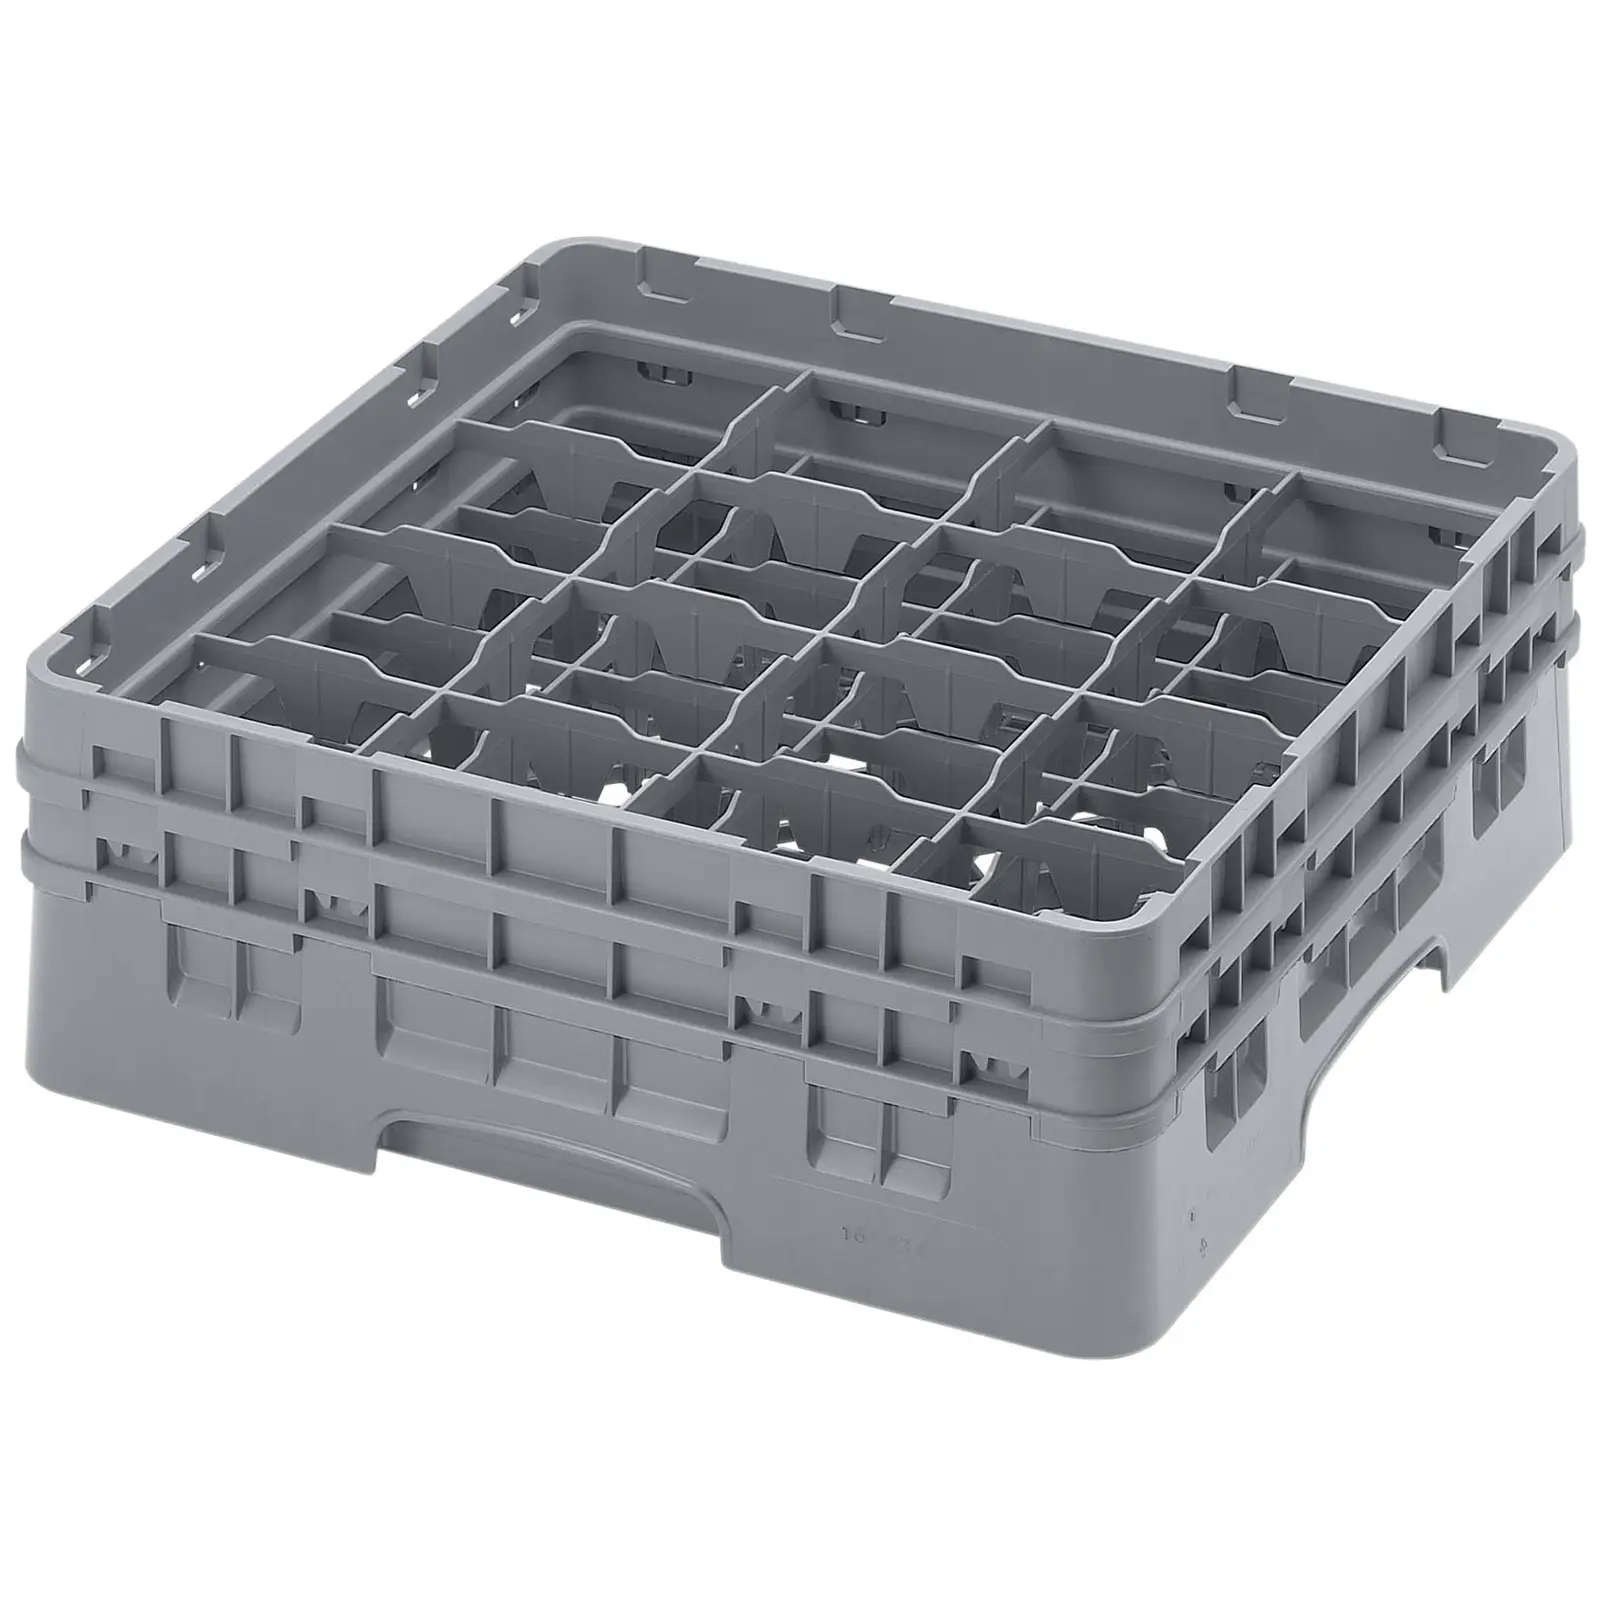 Glass Rack - 16 compartments - 50 x 50 x 18,4 cm - glass height: 13,3 cm